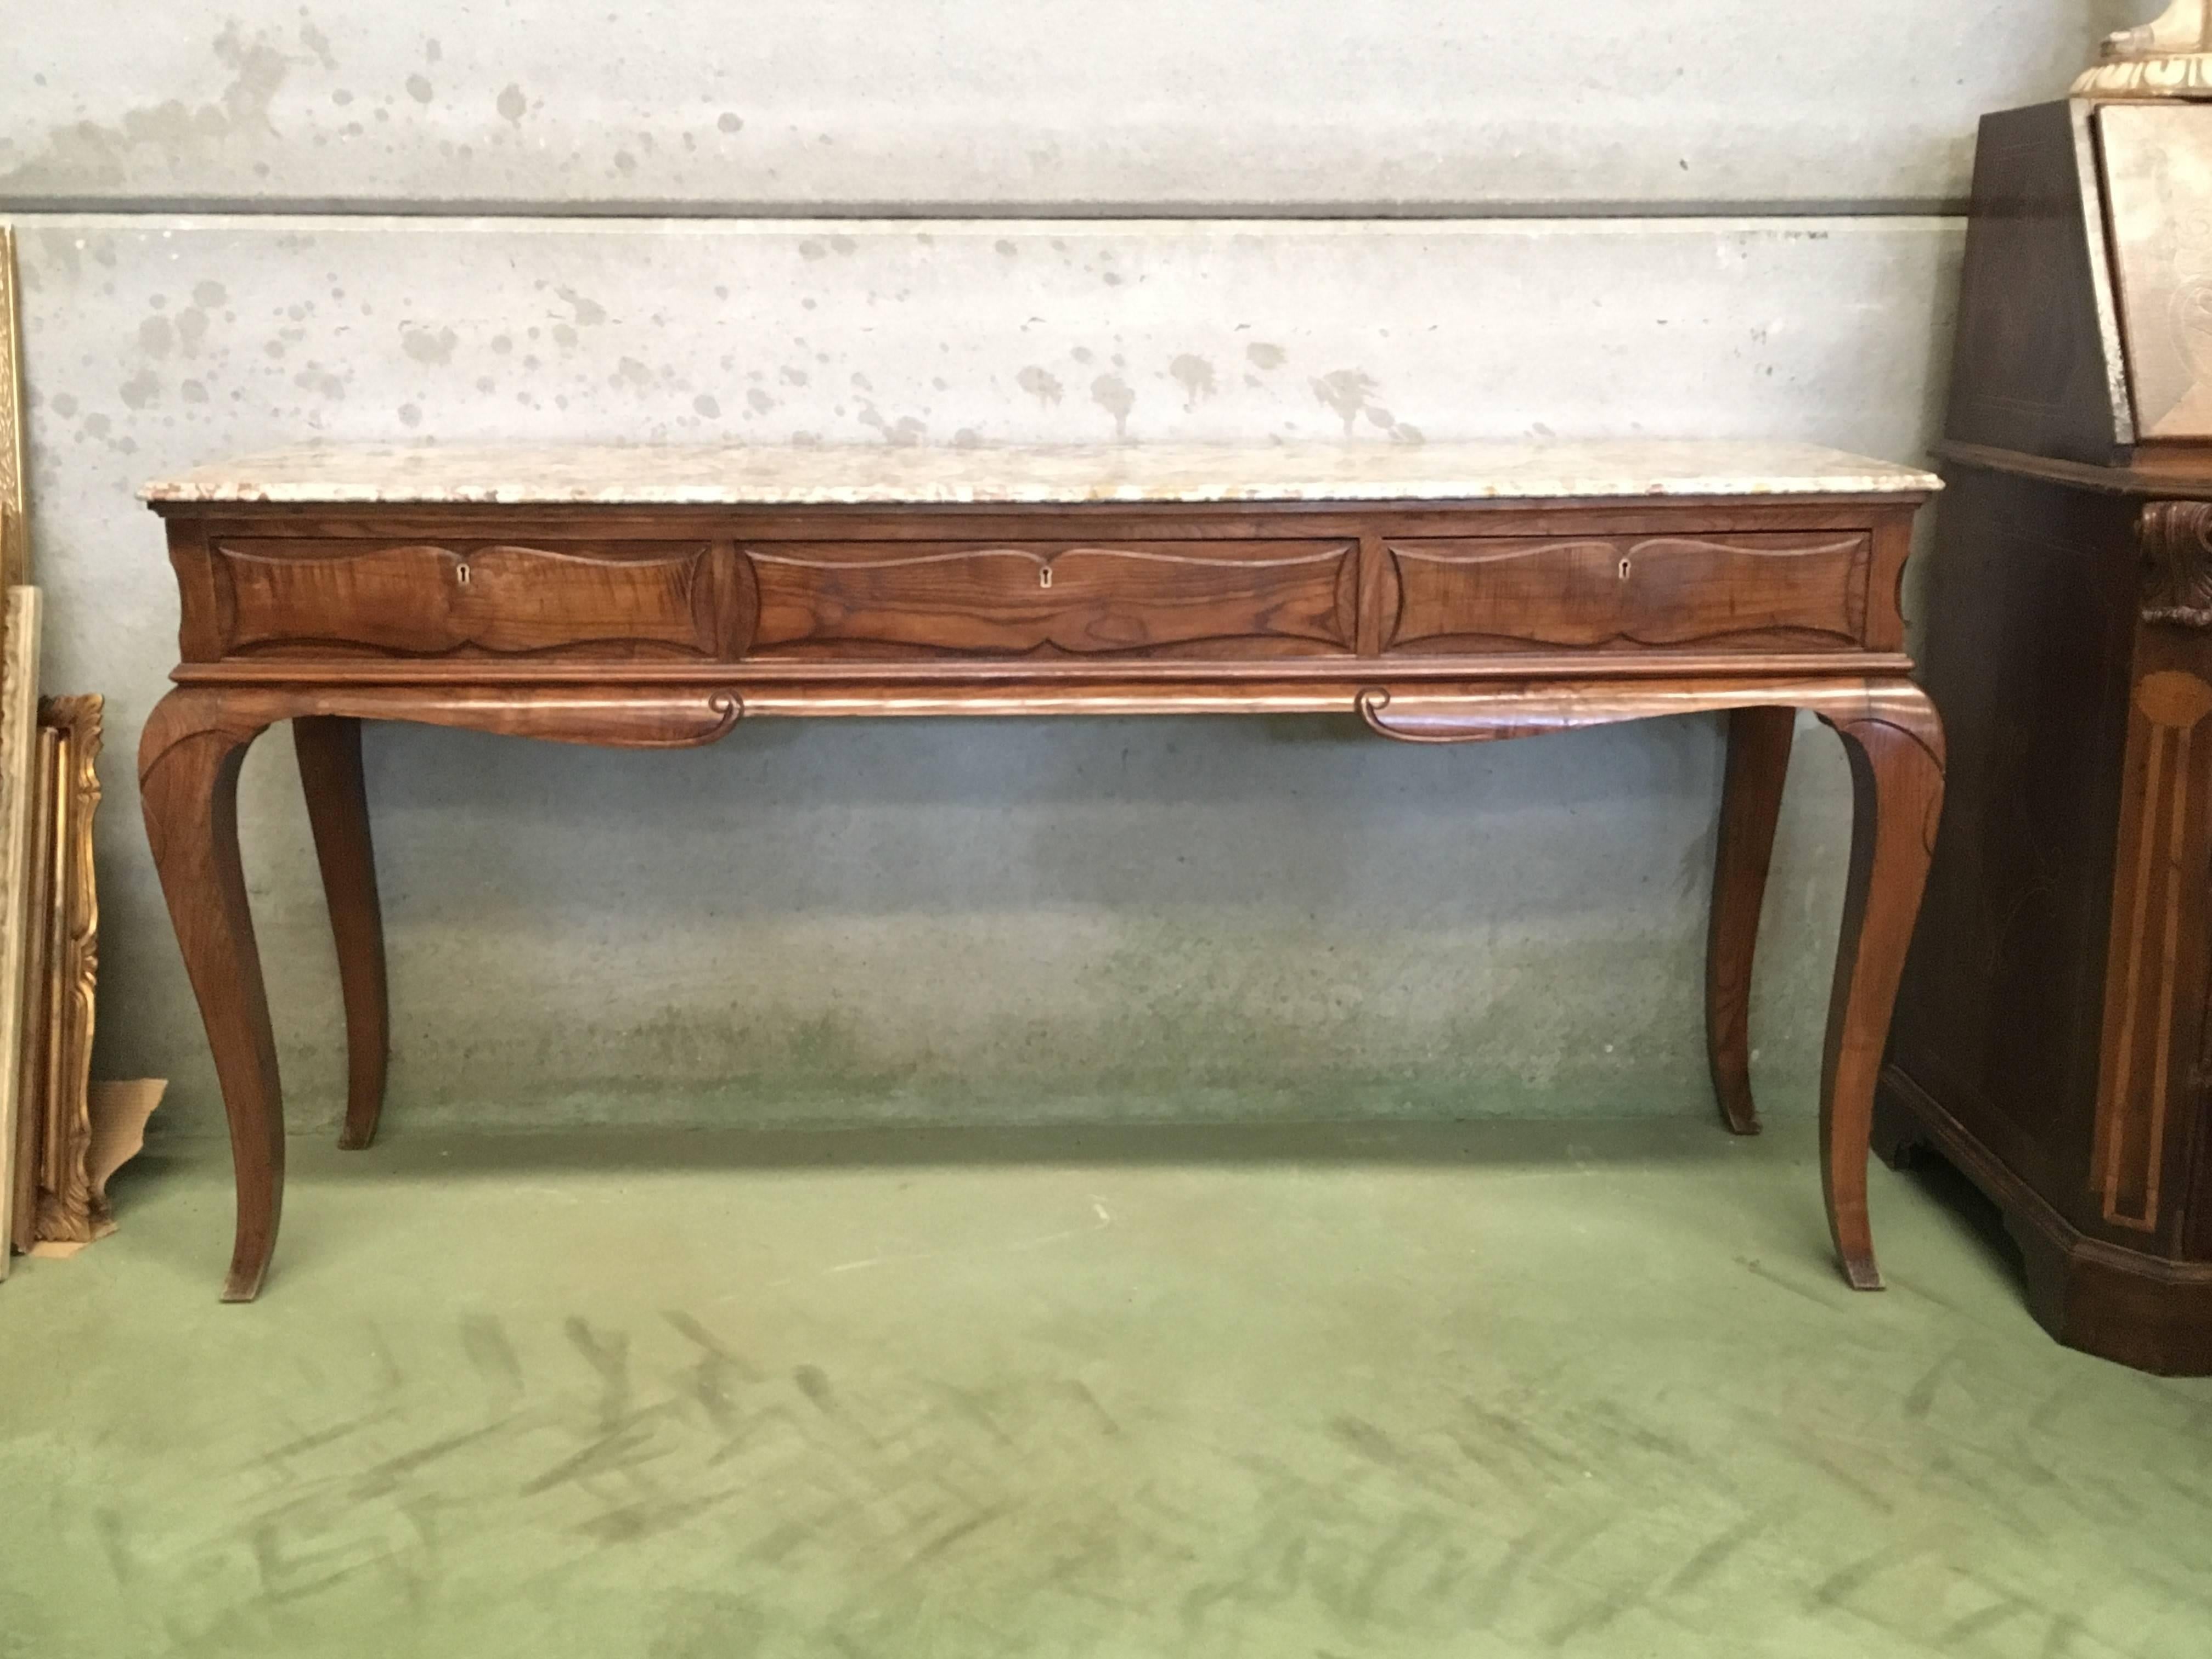 19th century Spanish Colonial three drawers console table with locks and marble top.